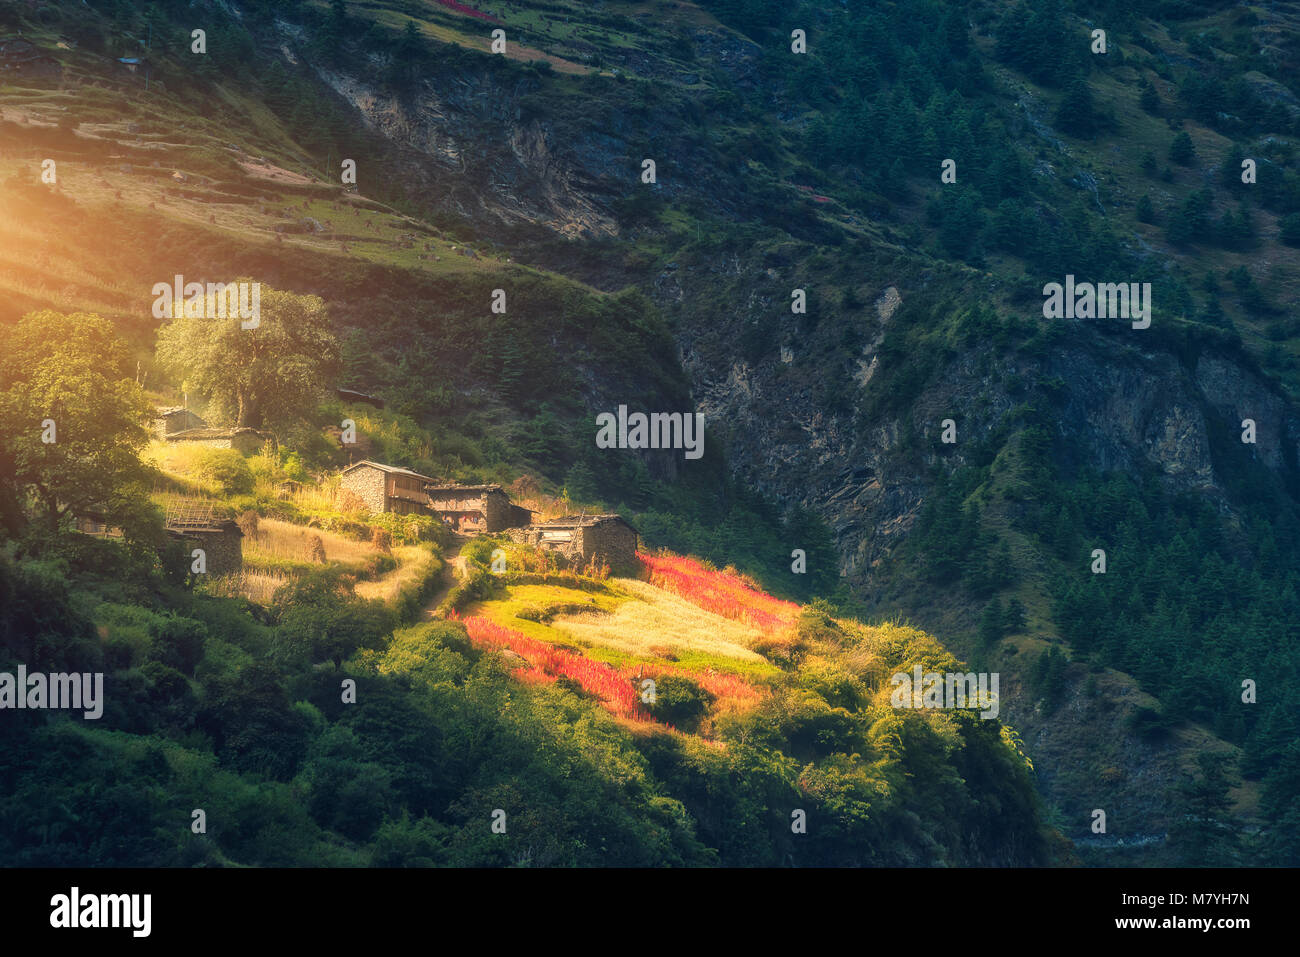 Small village on the hill lighted by a sunbeam at sunset. Fairy scene with houses, gardens with red flowers and trees, trail and mountain with green f Stock Photo